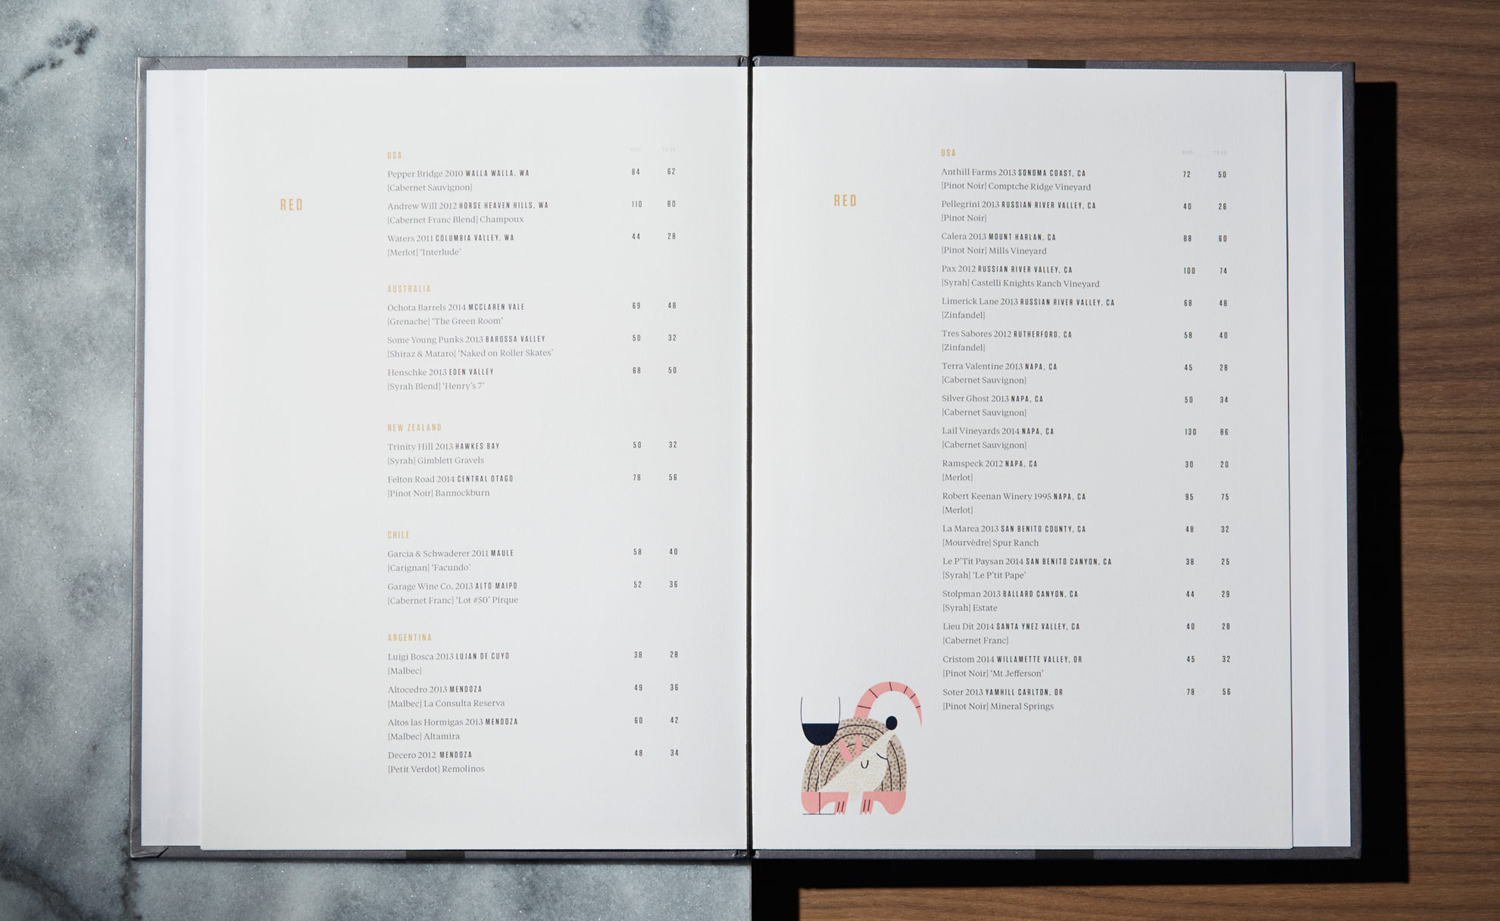 Brand identity and menu designed by Conductor featuring illustration by Tom Froese for High Street Wine Co, a wine bar and shop located in San Antonio's Pearl neighbourhood